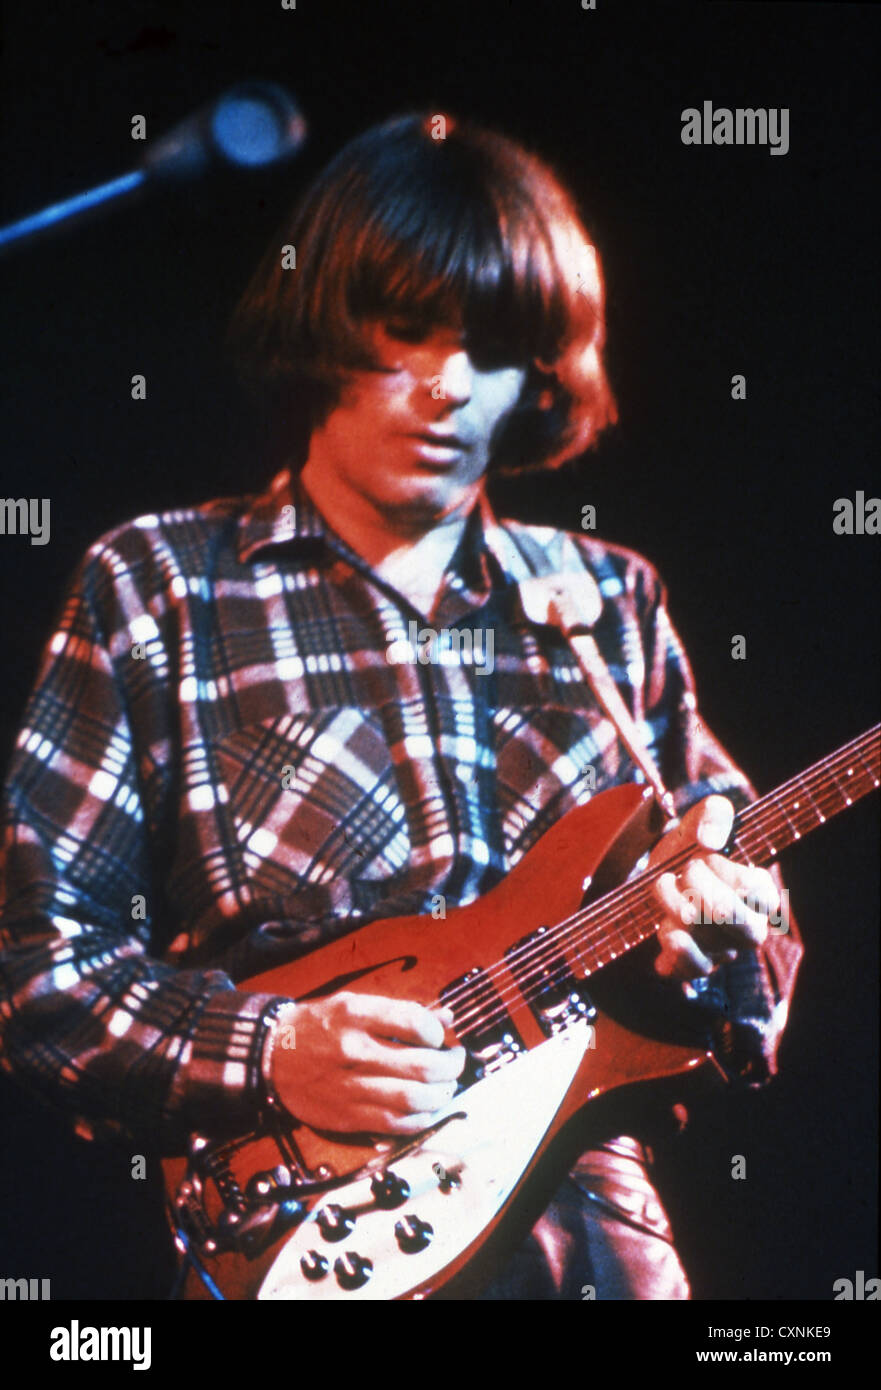 CREEDENCE CLEARWATER REVIVAL  US rock group about 1971 with John Fogerty Stock Photo